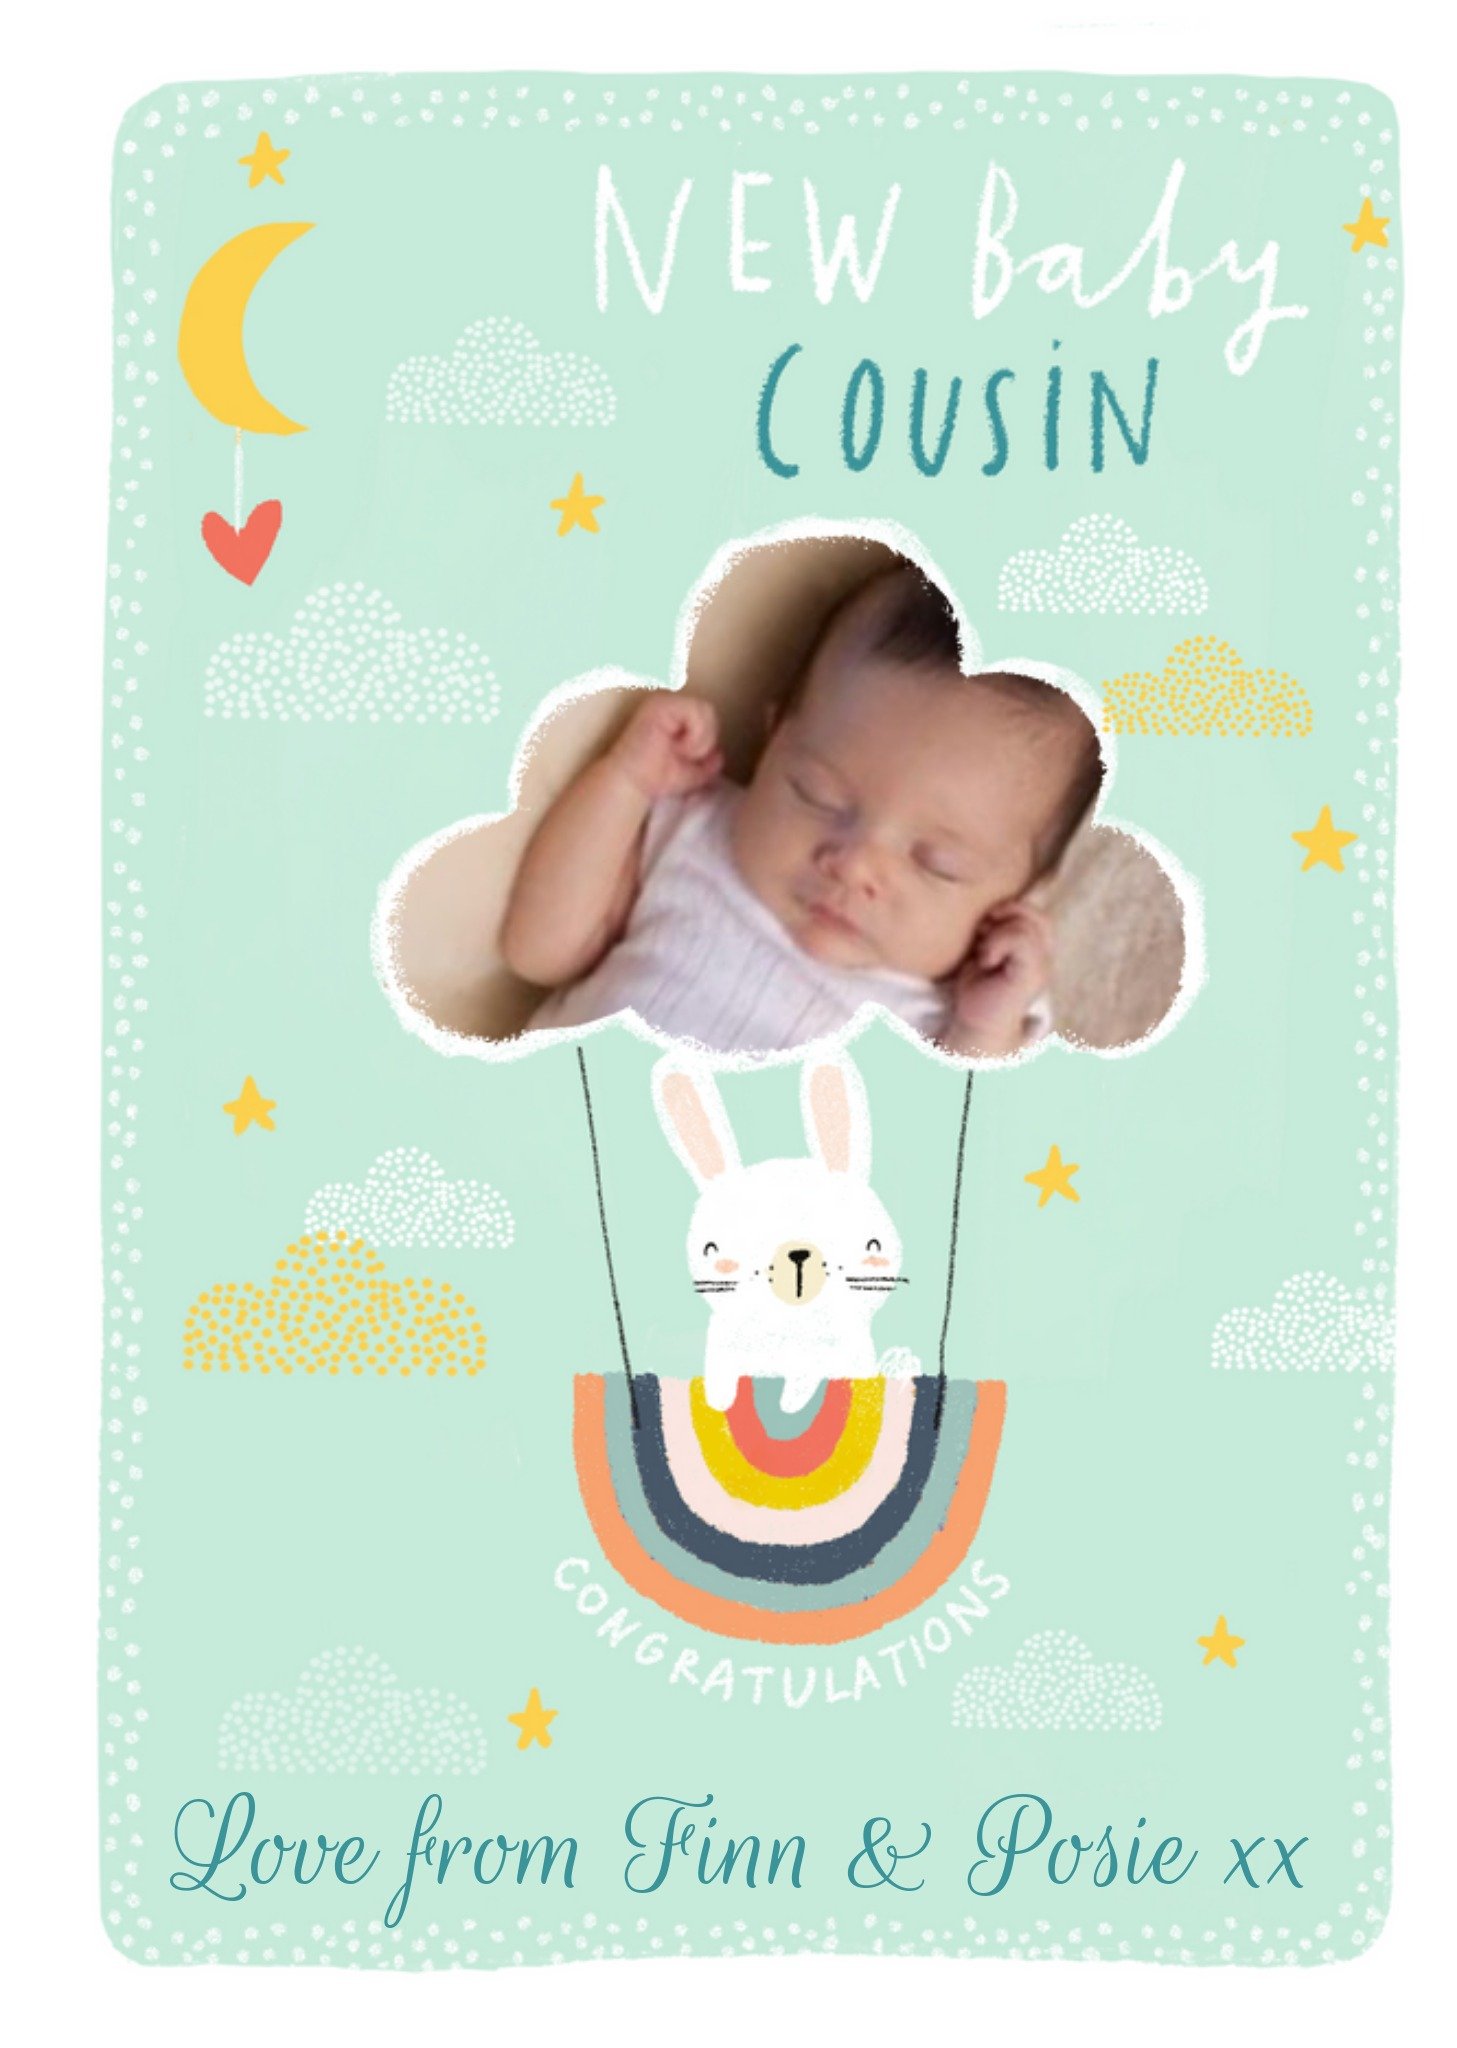 Moonpig Cute Illustration Of A Bunny In A Basket Under A Cloud Shaped Balloon New Baby Cousin Congra